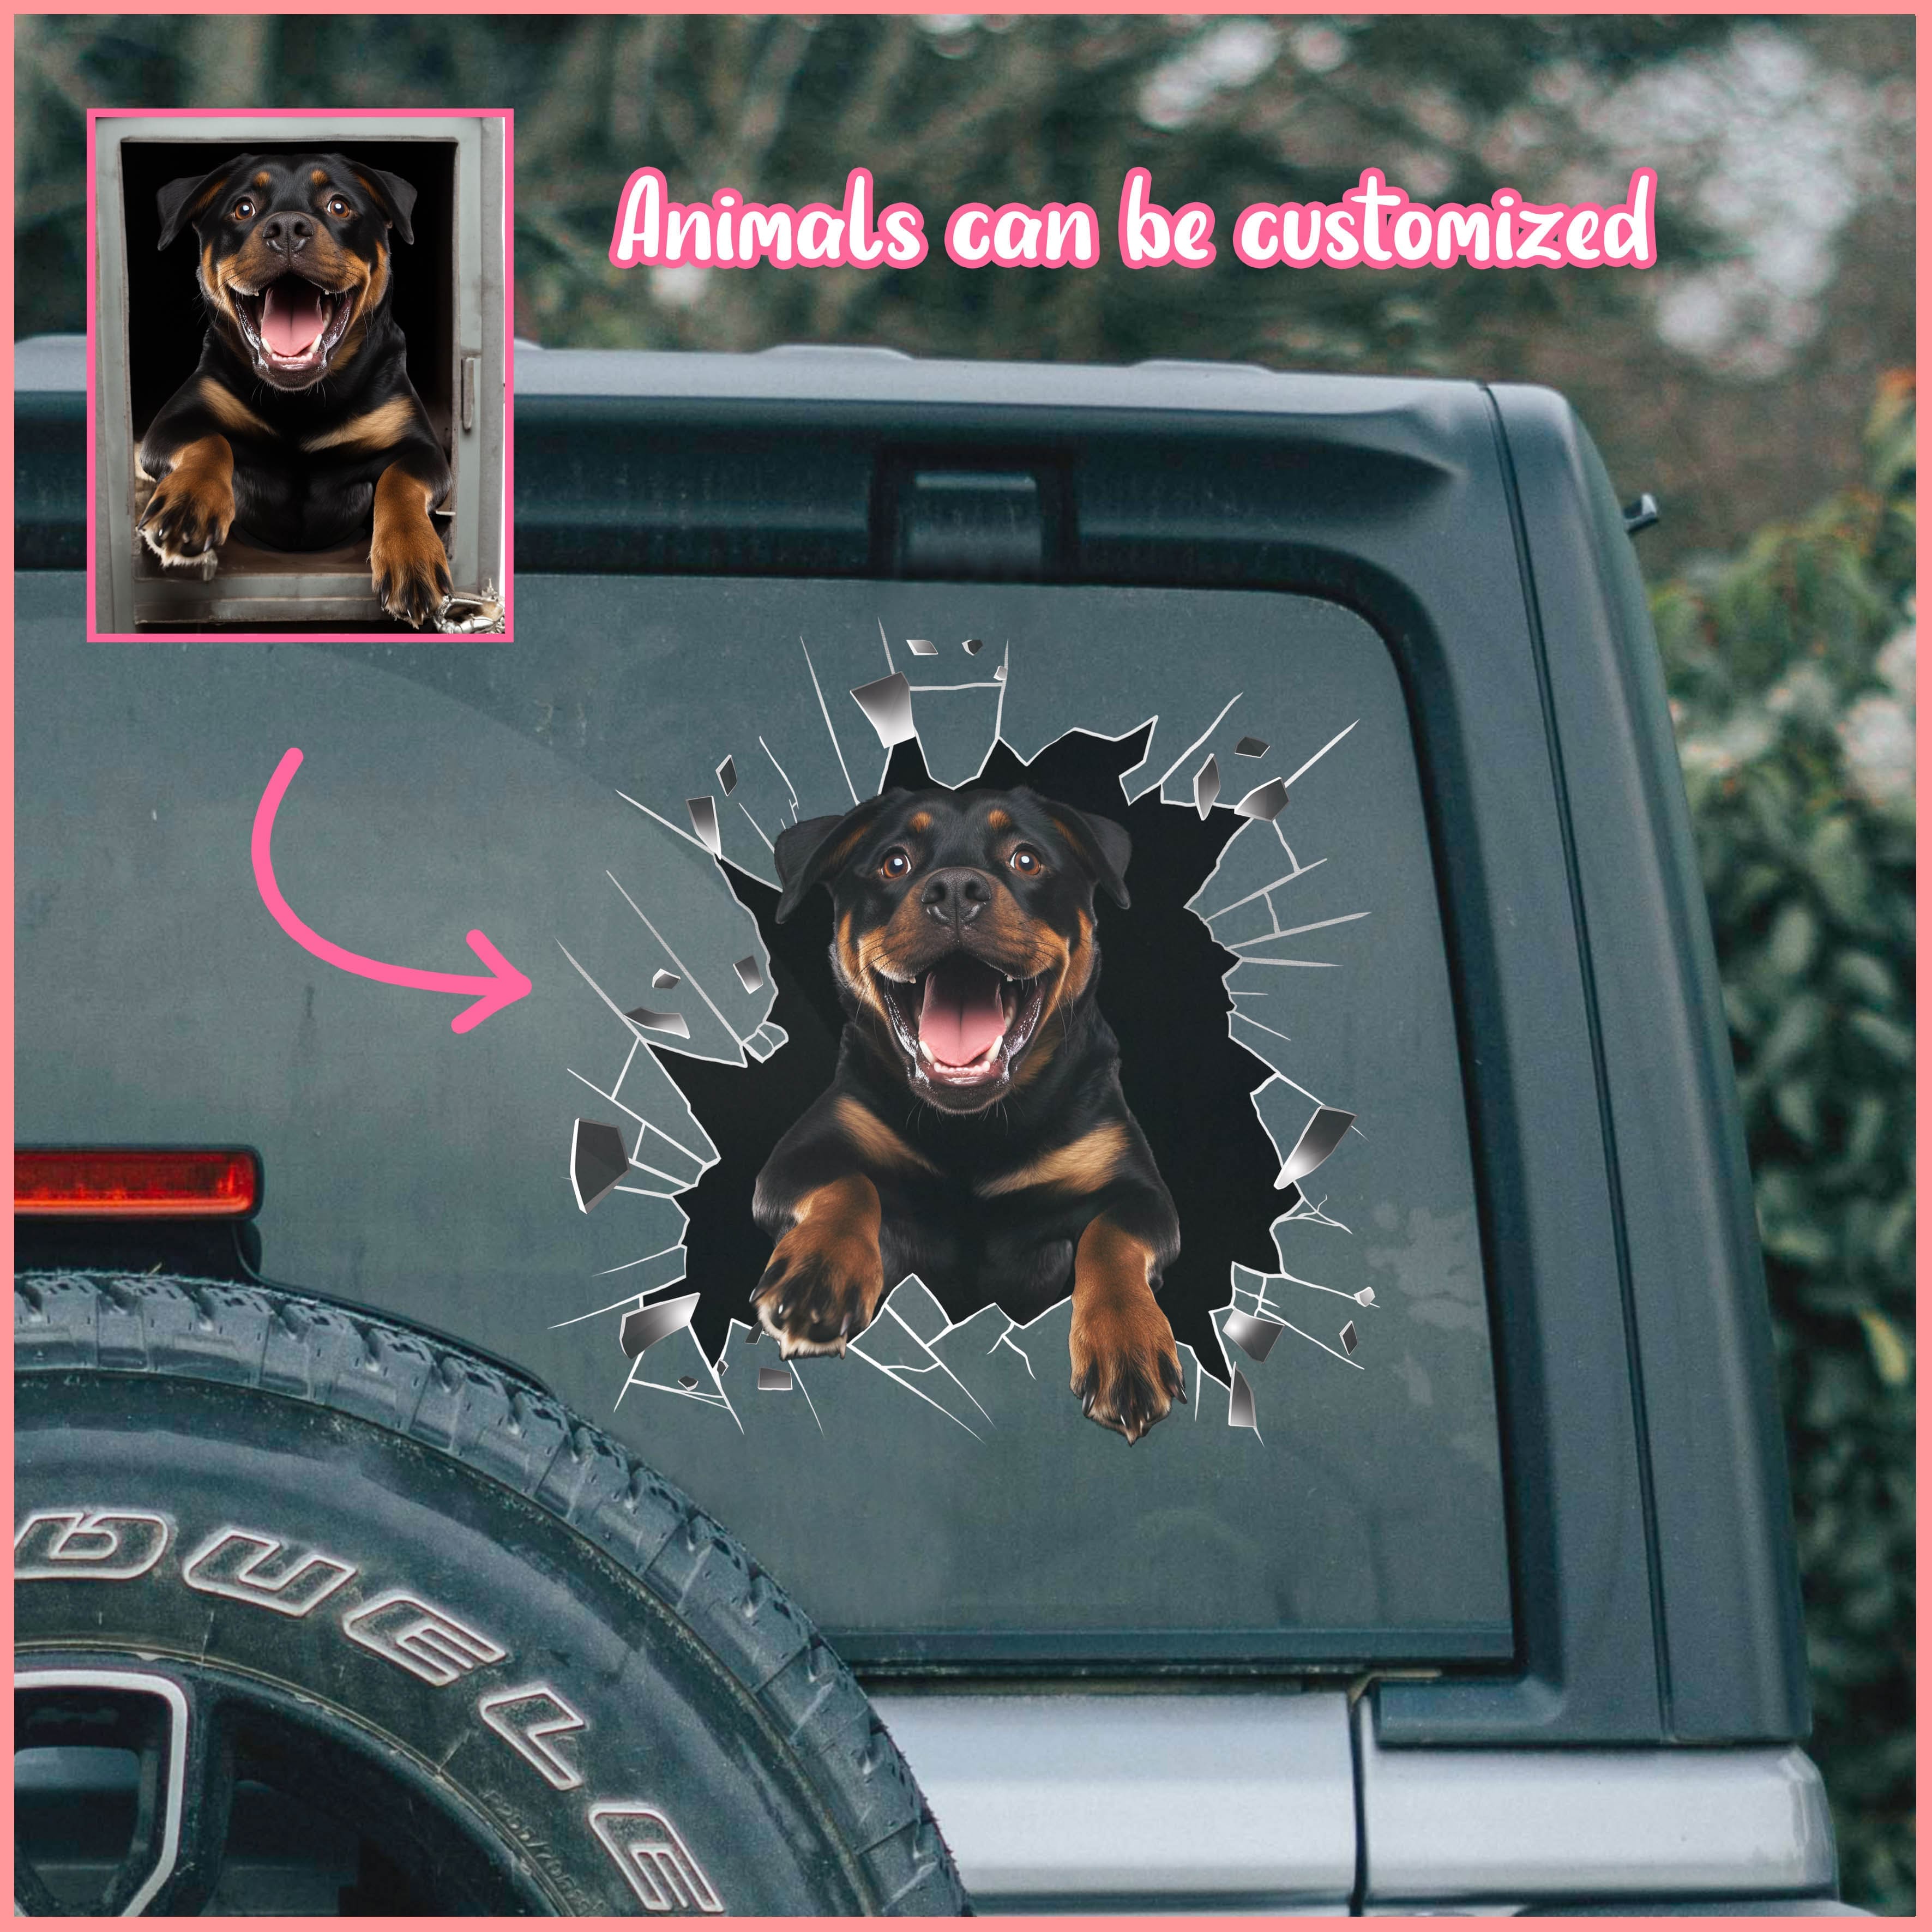 Rottweiler car decal, Animals can be customized